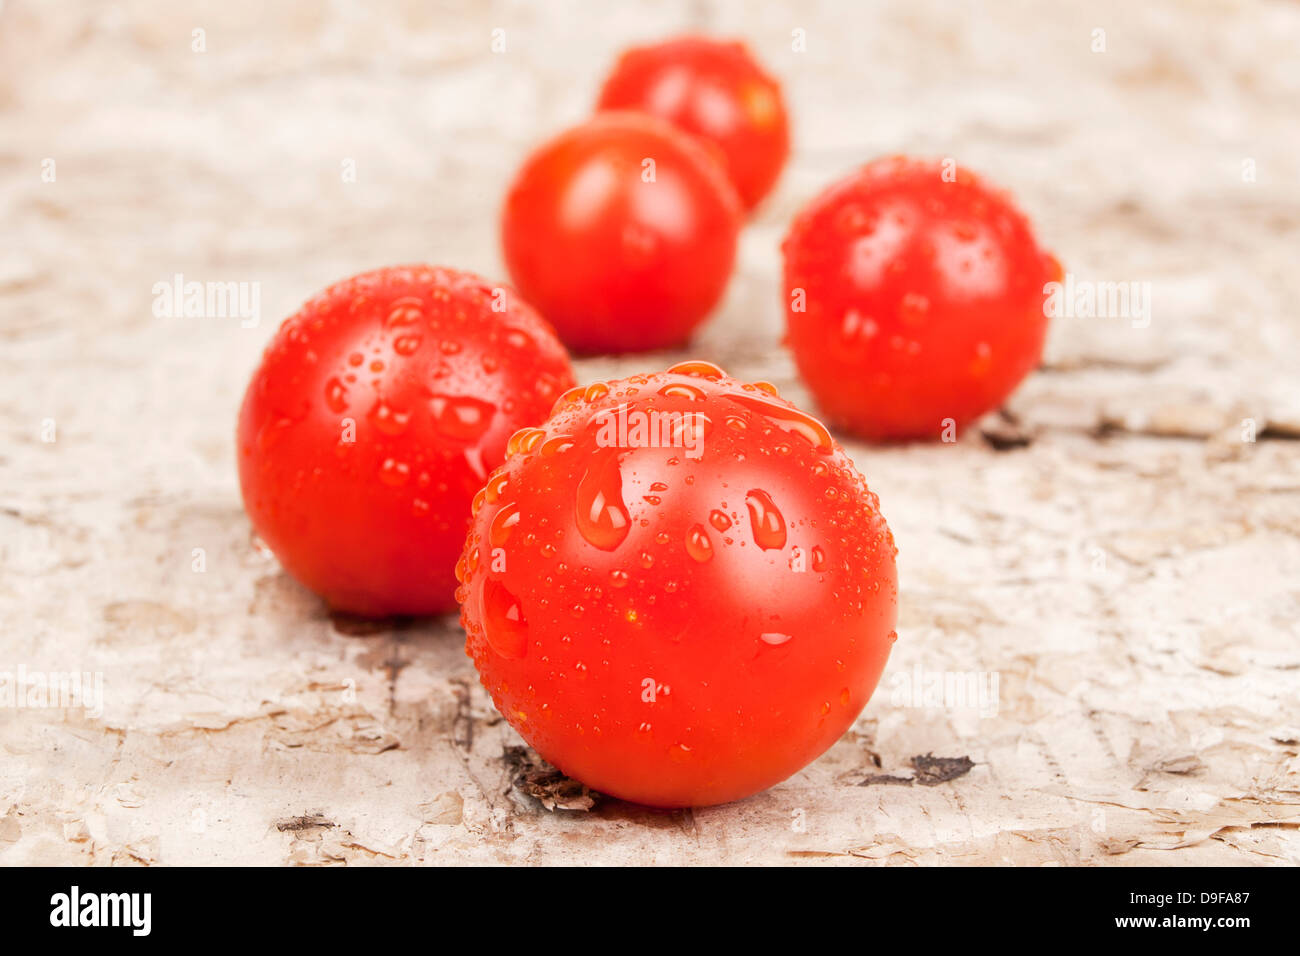 Cocktail tomatoes cherry Tomatoes Stock Photo